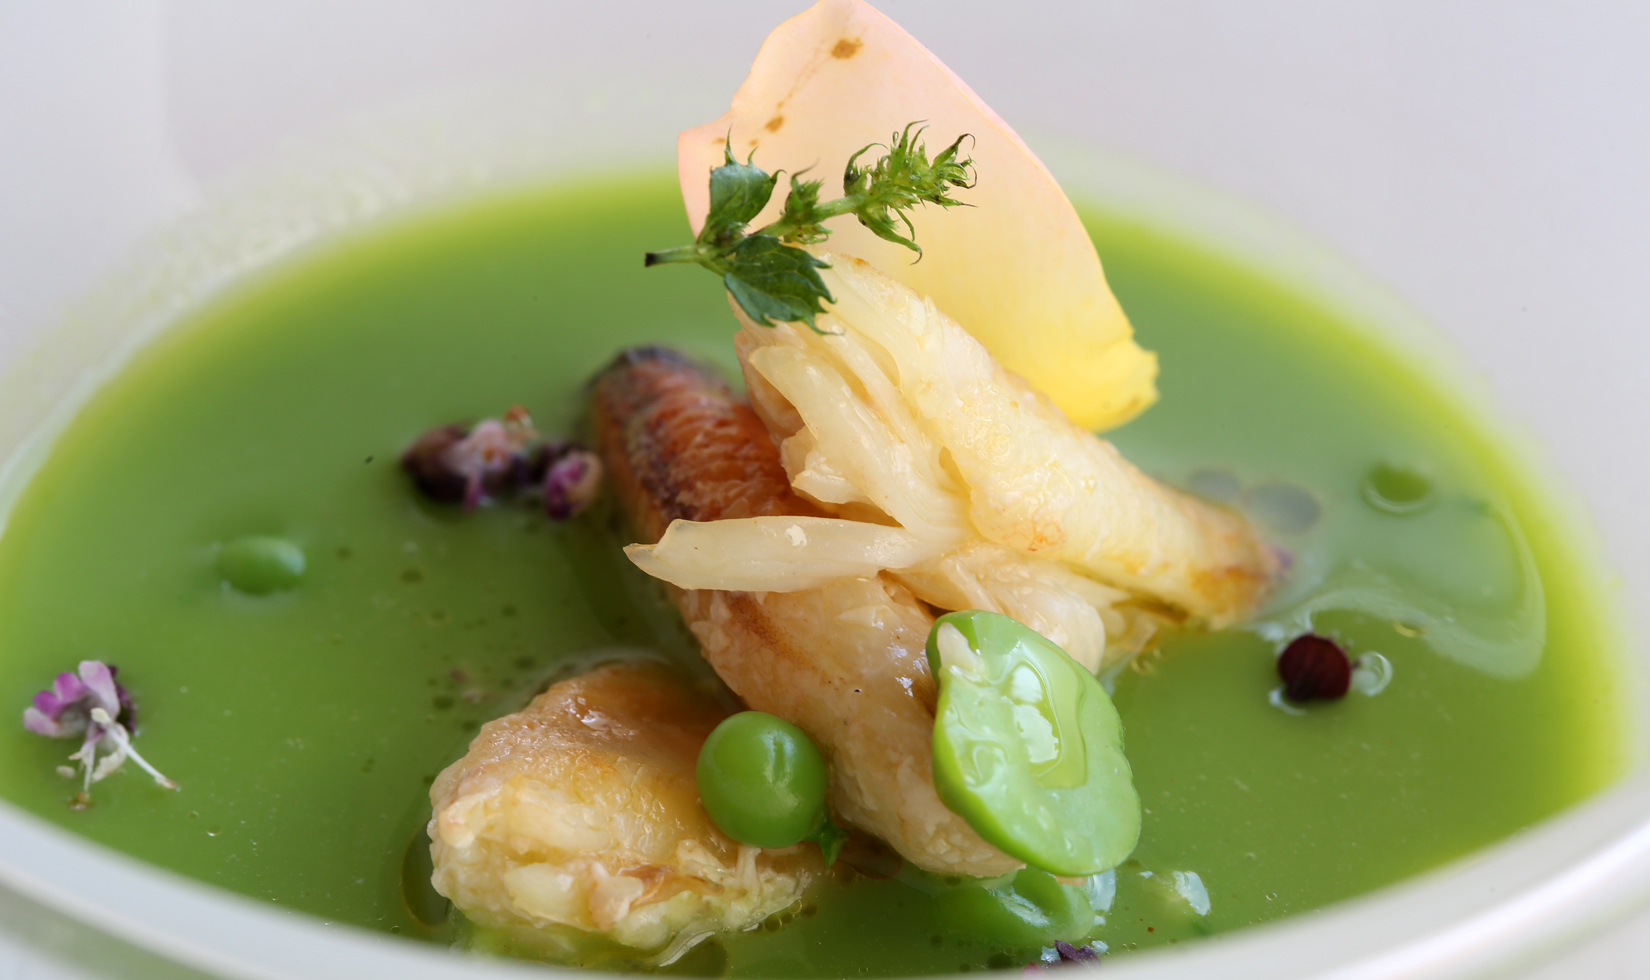 Jordan Winery pea soup with dungeness crab in white bowl